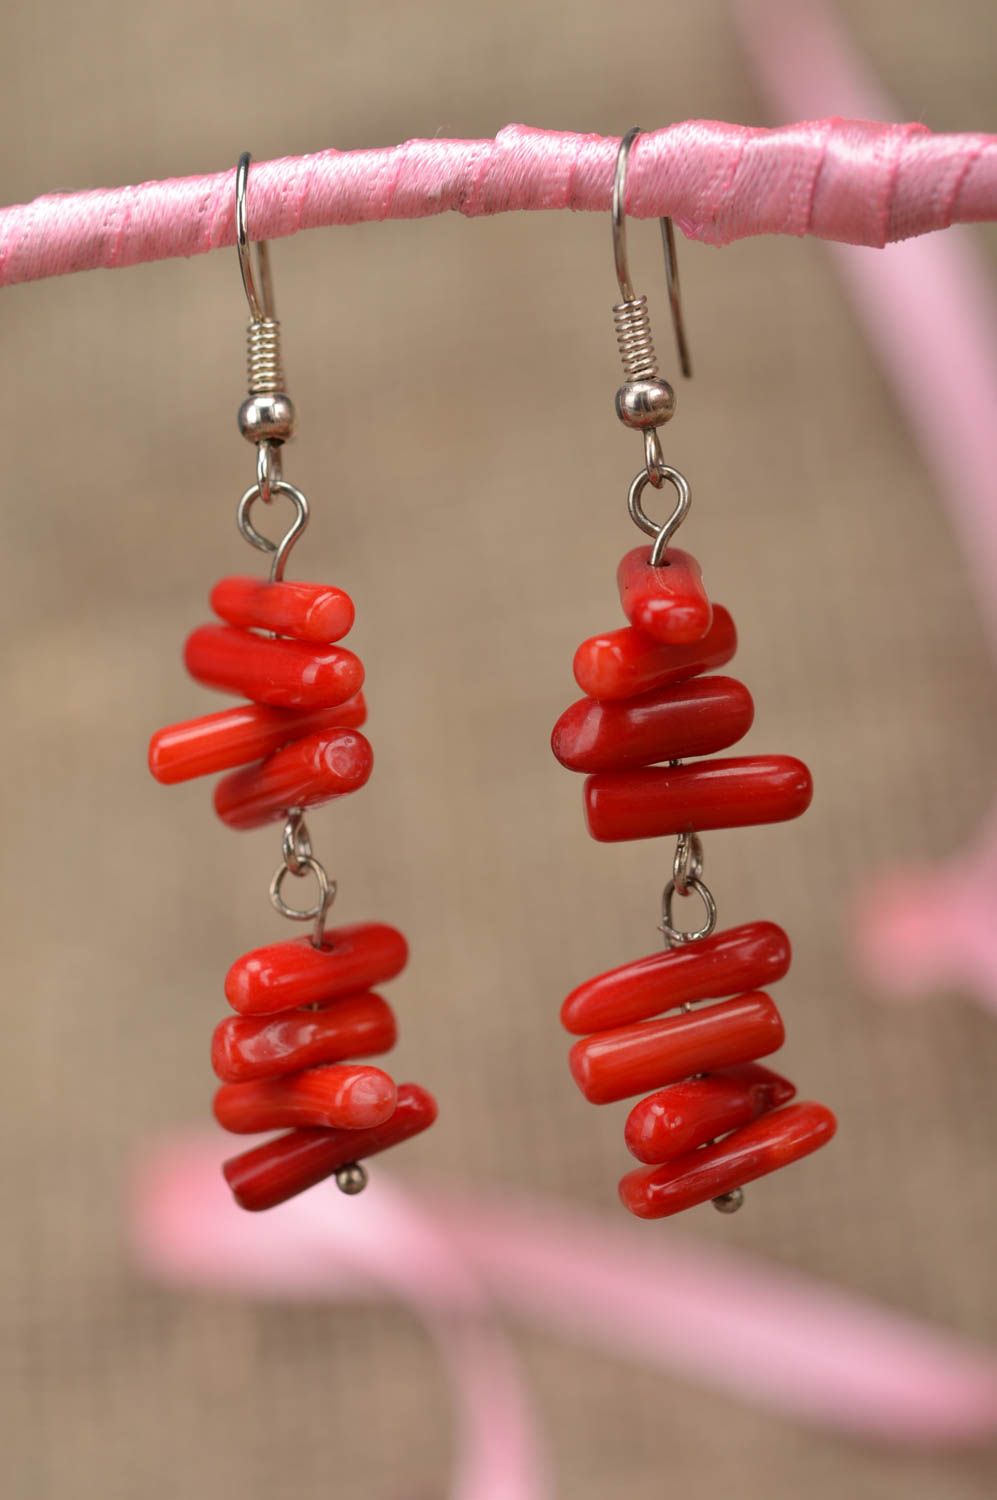 Handmade dangling earrings cute earrings with natural stones jewelry with corals photo 1